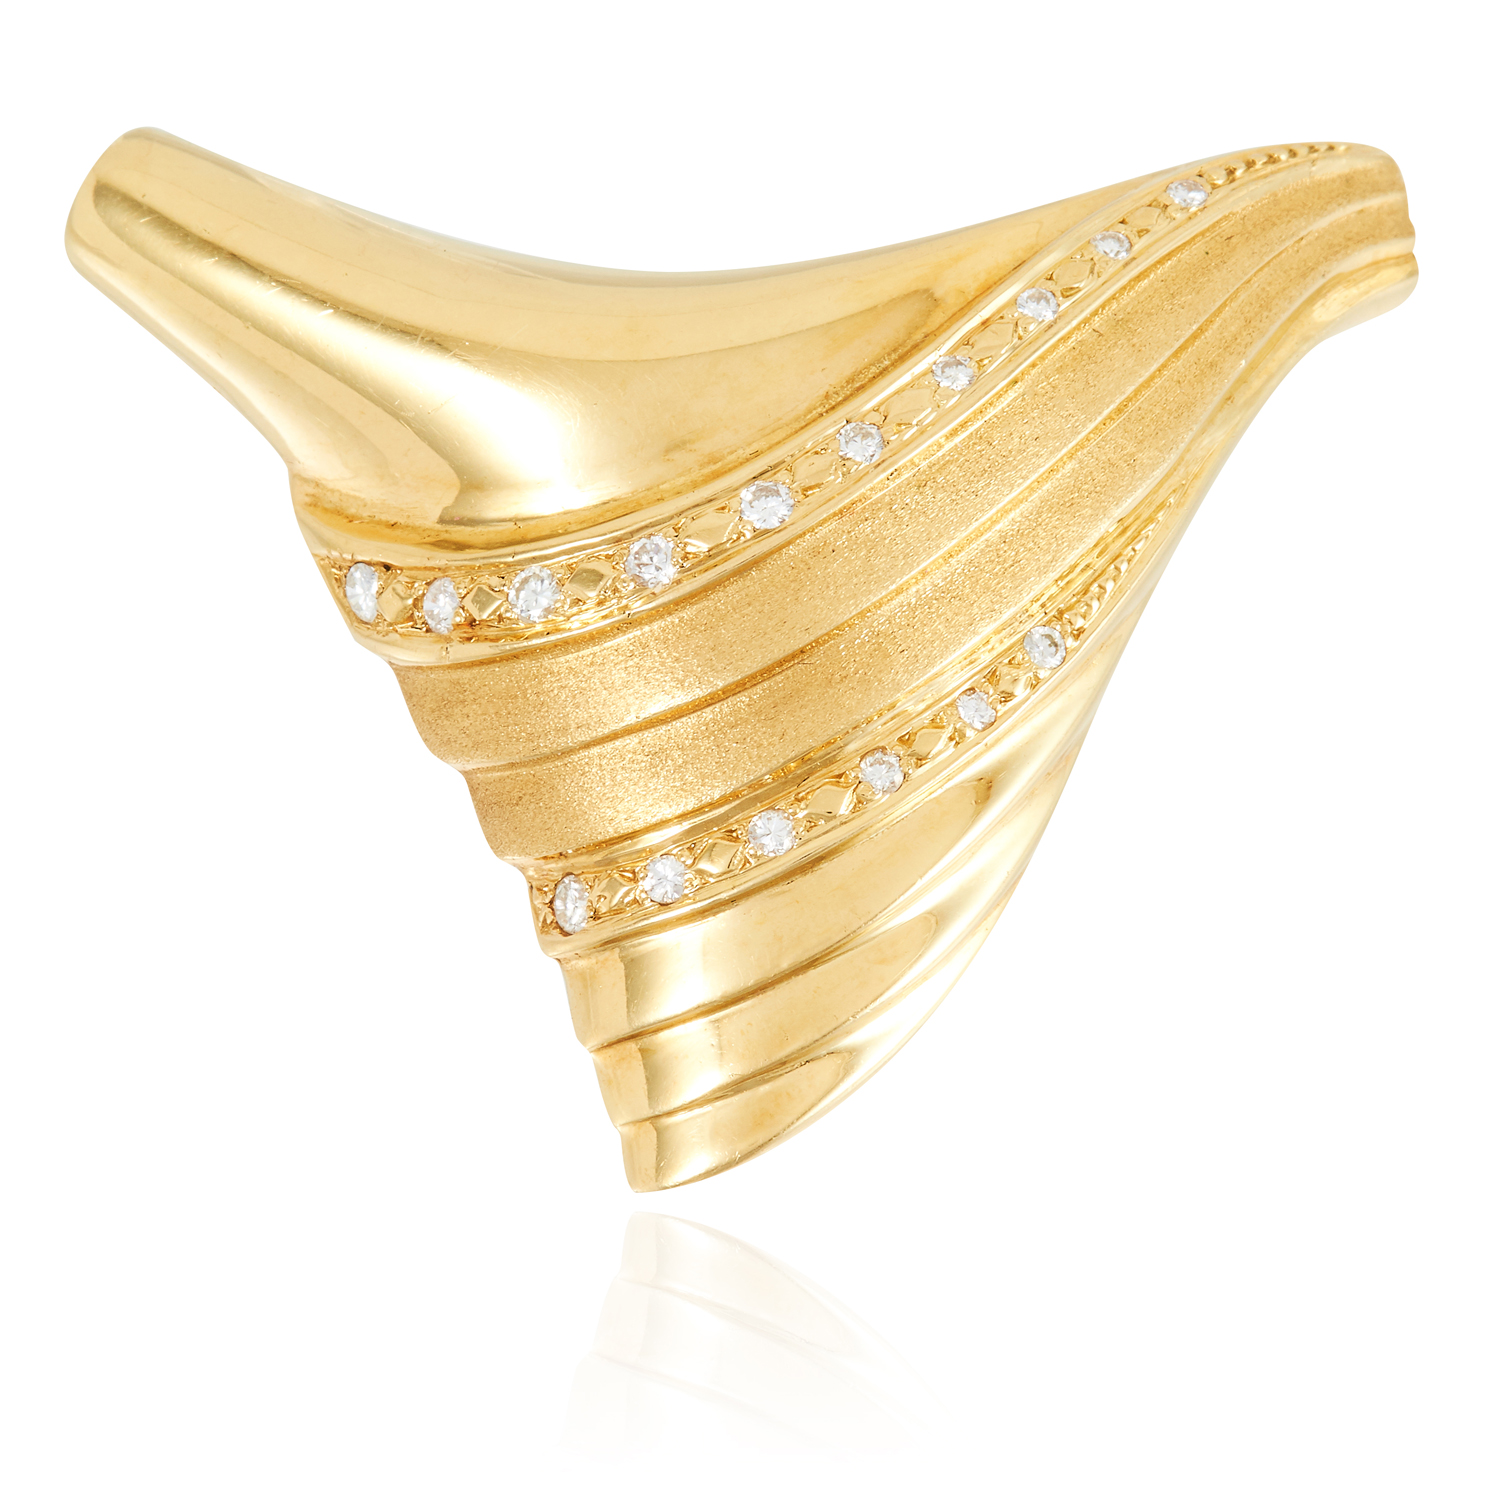 A DIAMOND CLIP / SNAP PENDANT in 18ct yellow gold, the undulating design jewelled with two rows of